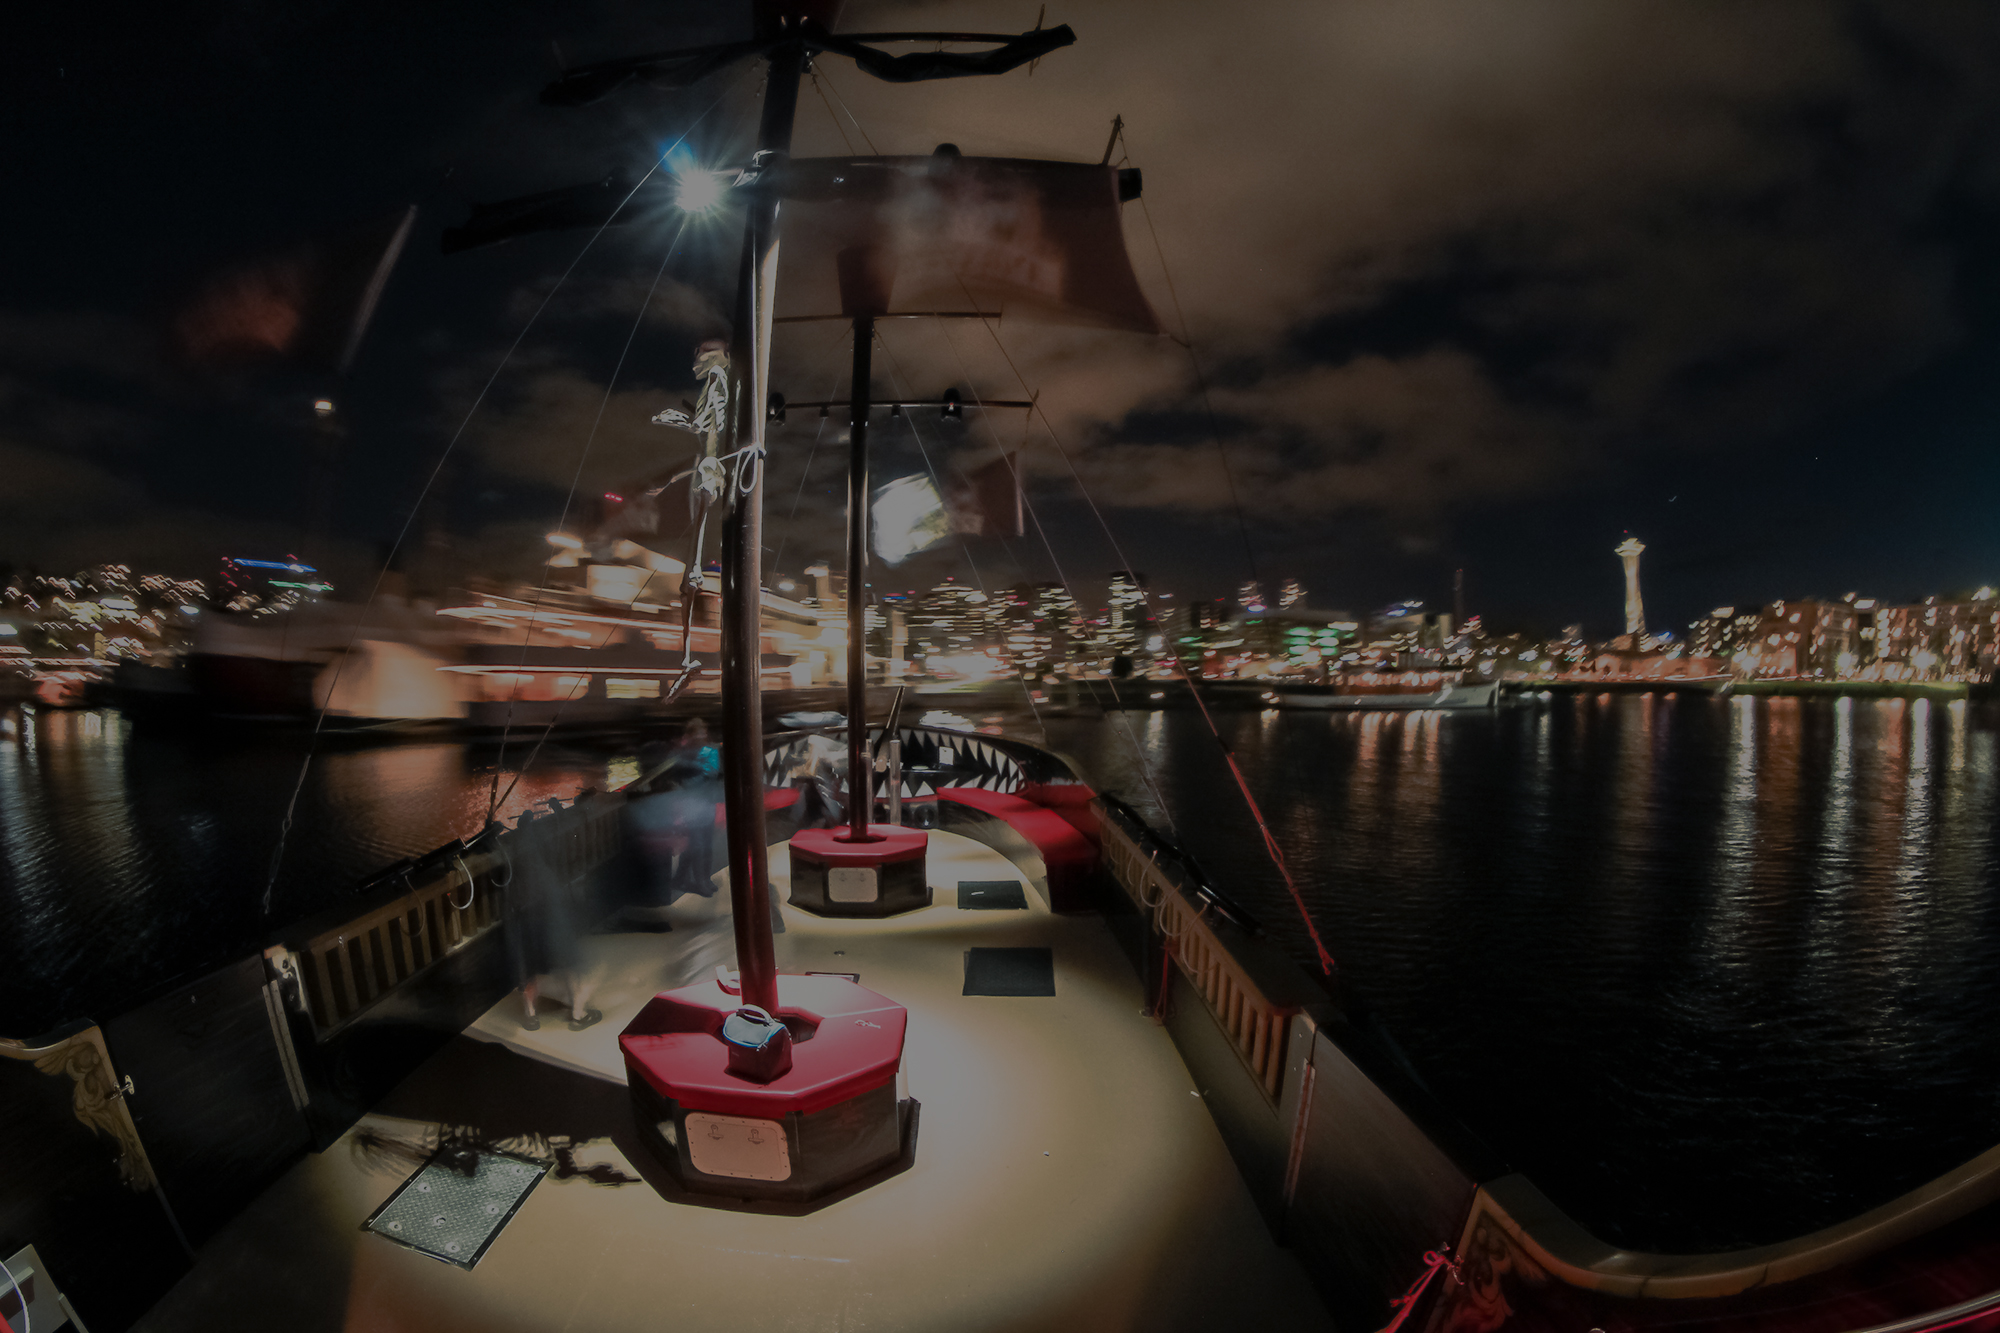 Pirate Ship at night on Lake Union in Seattle